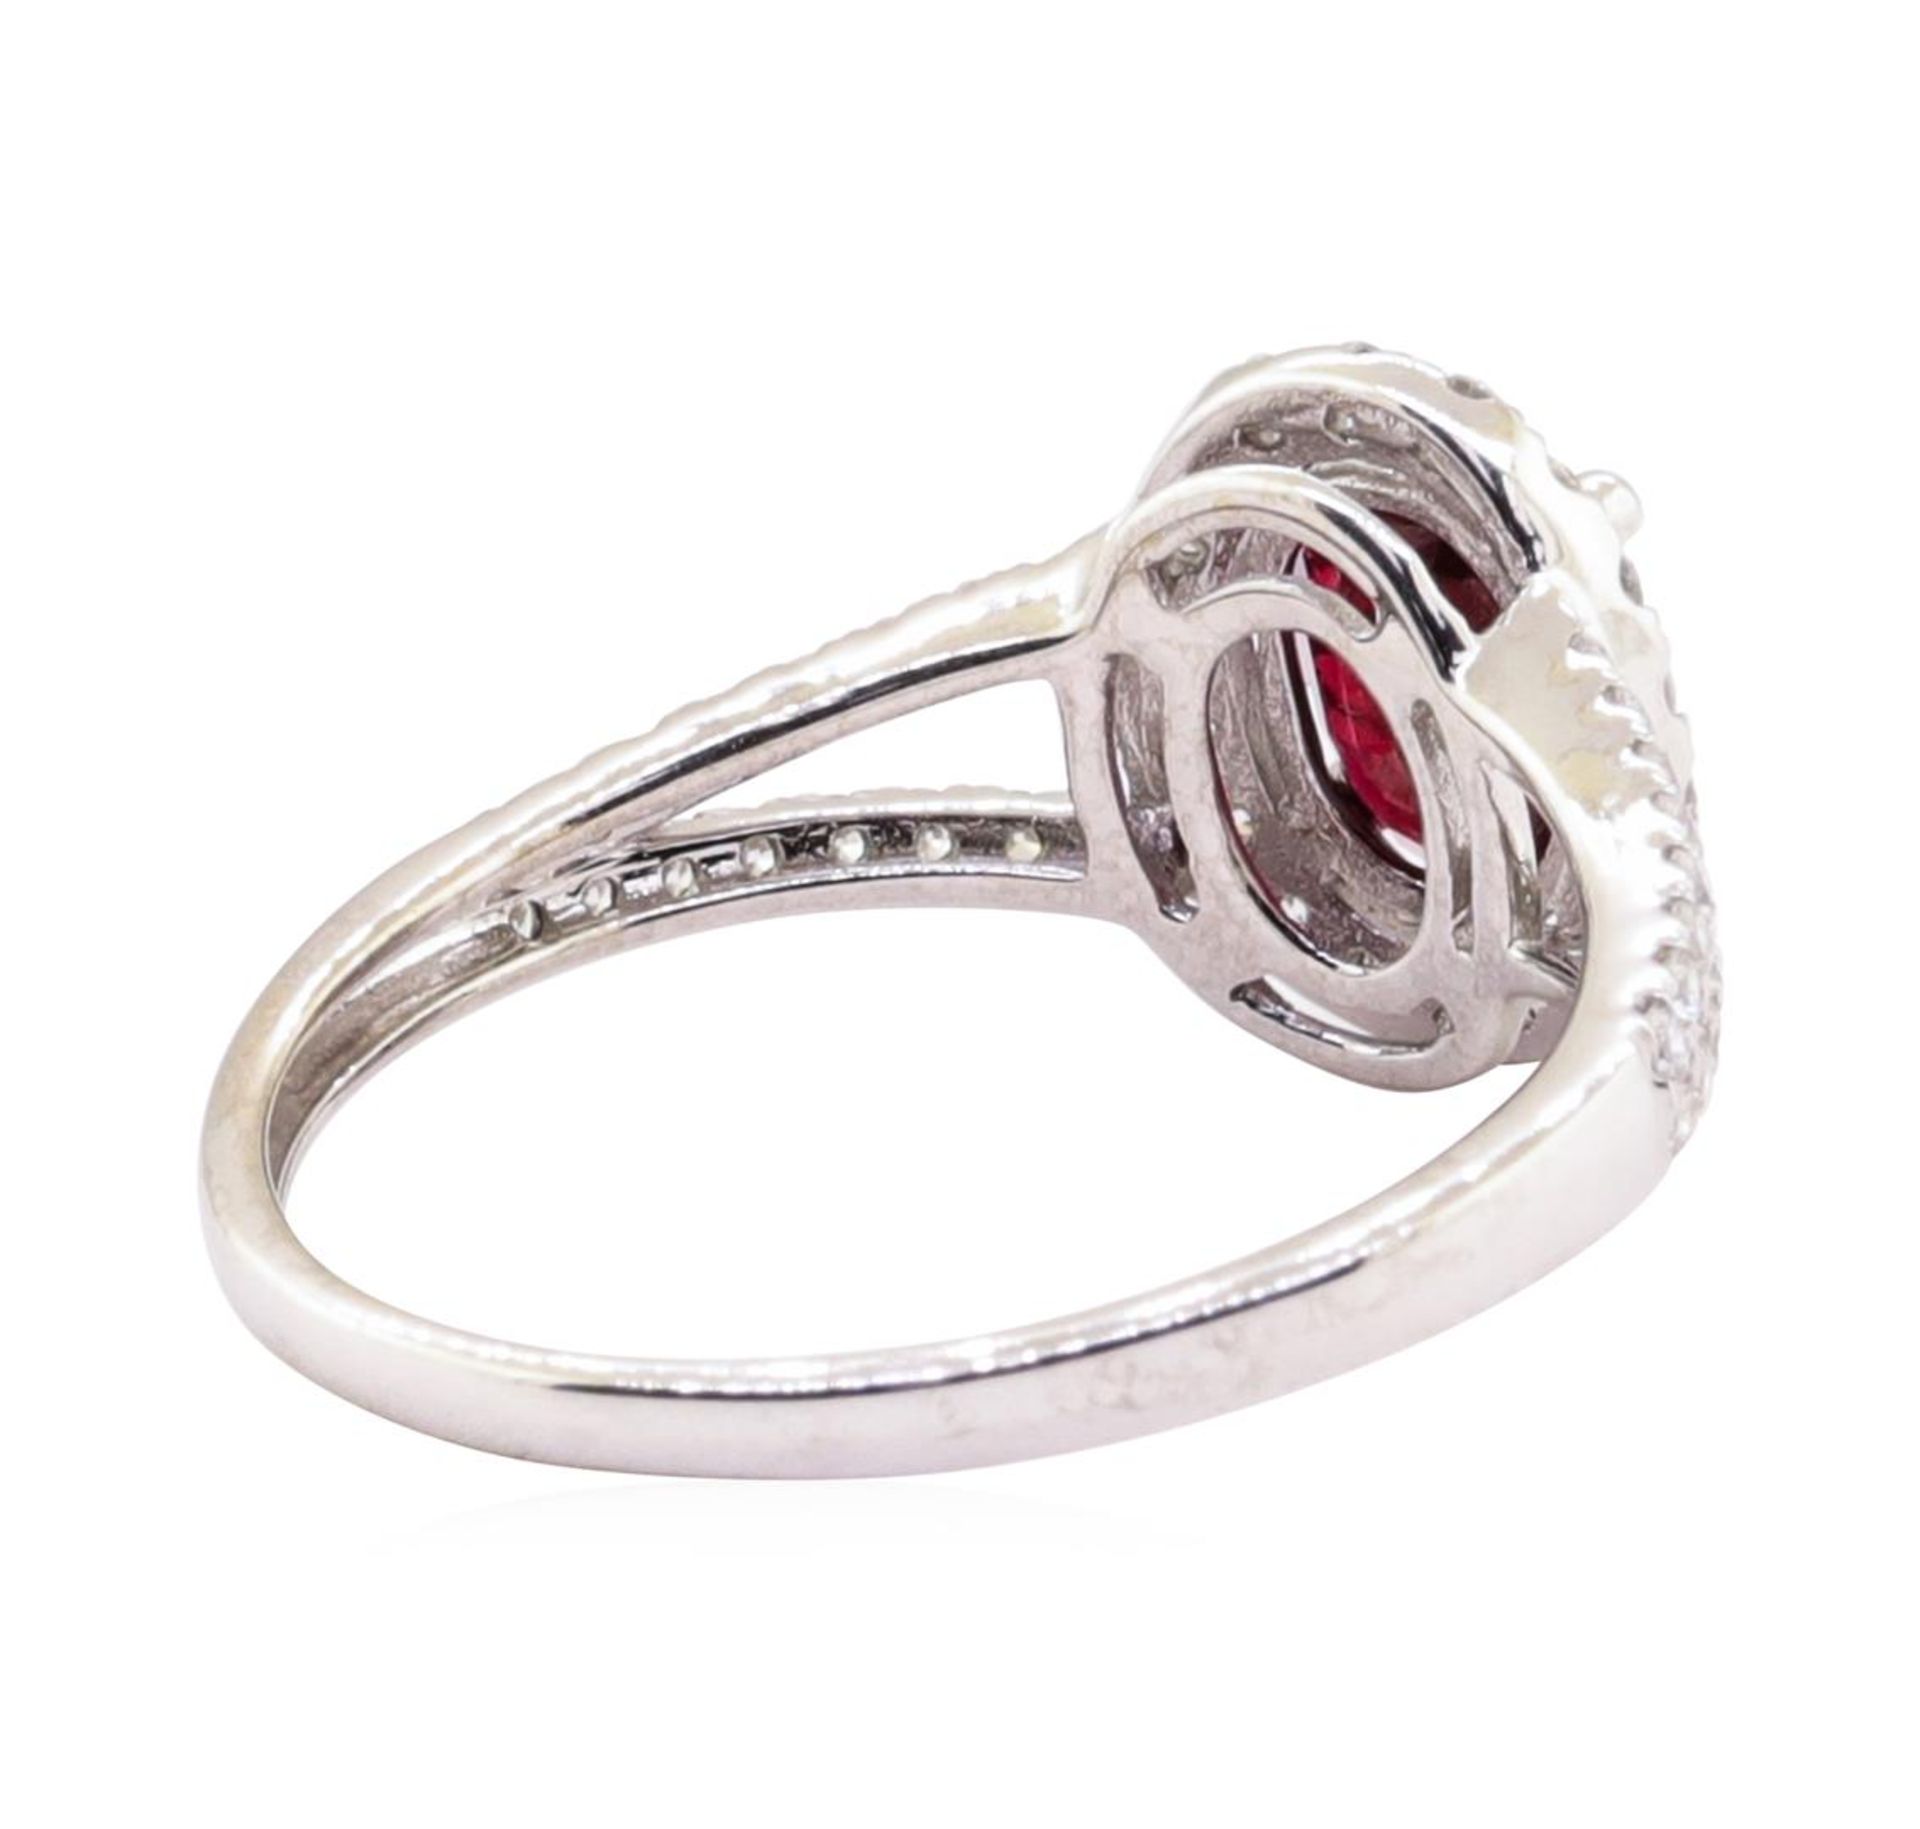 1.00 ct Ruby and Diamond Ring - 14KT White Gold - Image 3 of 6